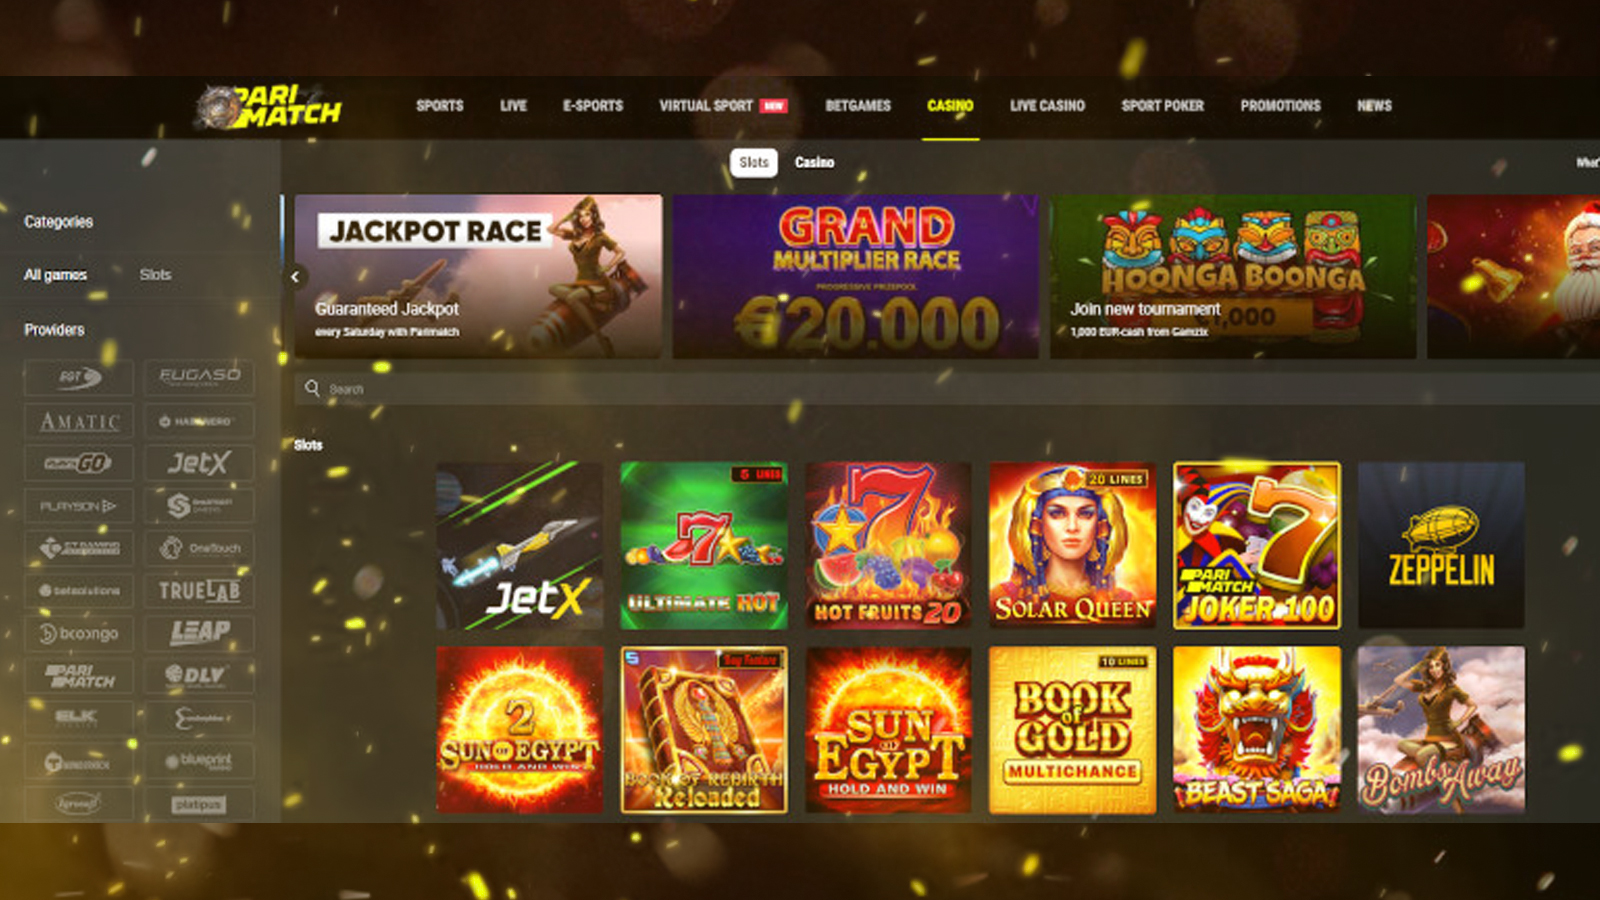 Parimatch gives great opportunities for gambling, so sign up and start playing casino games.